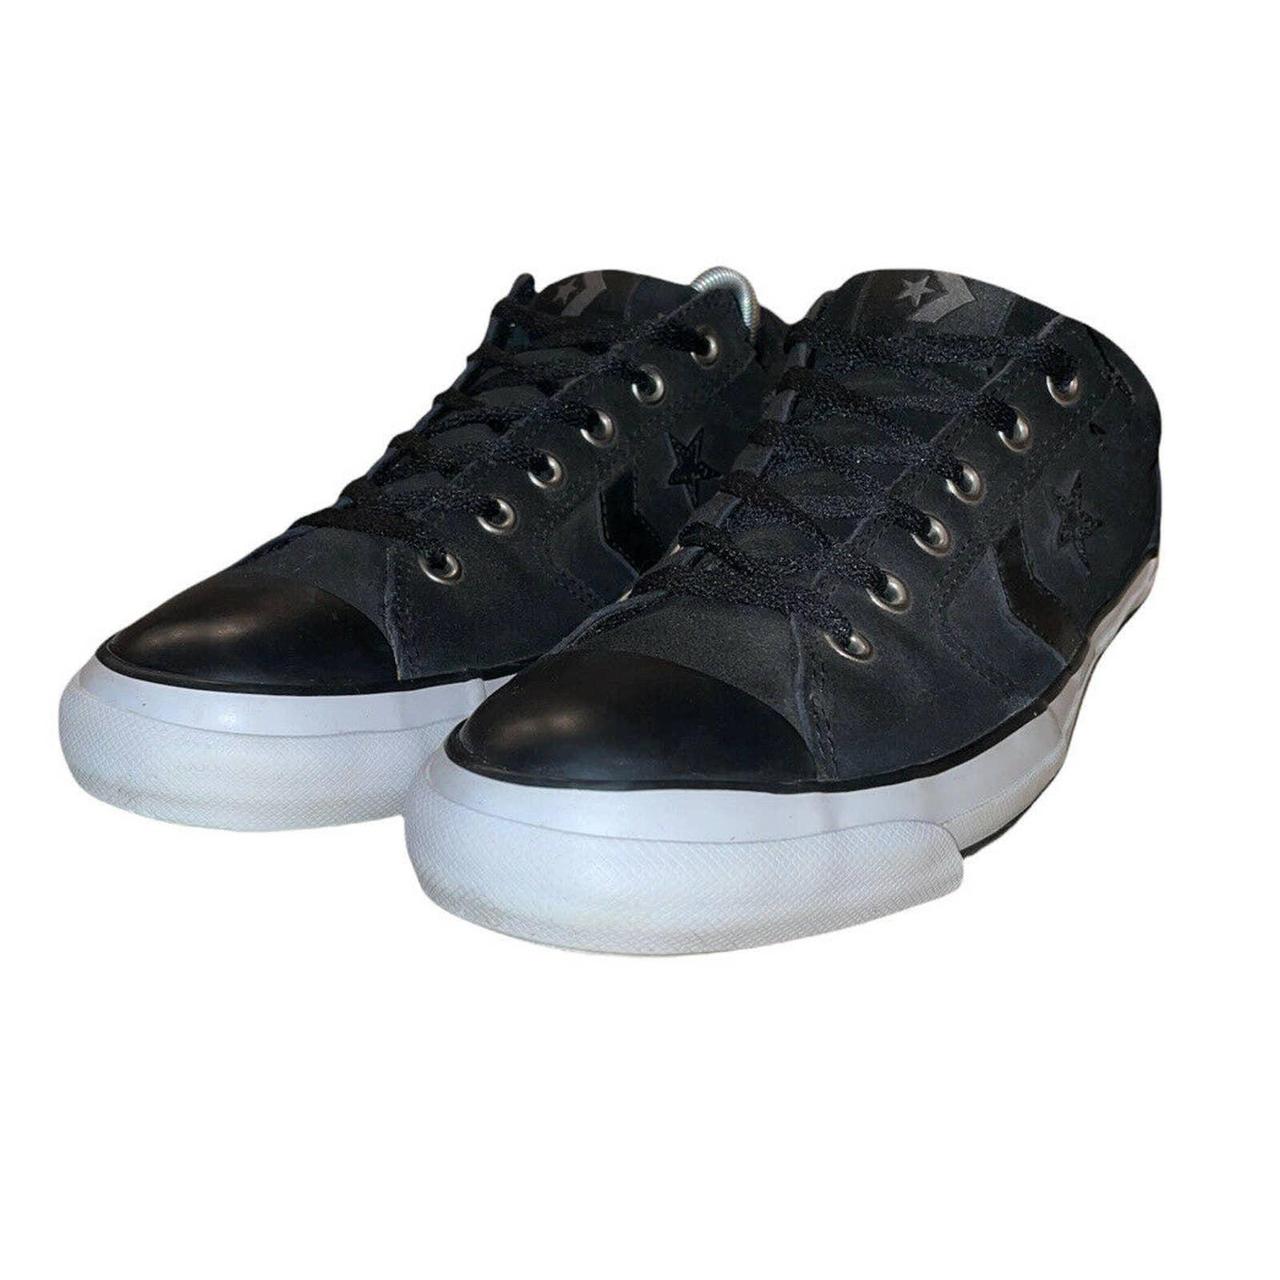 Product Image 1 - Converse One Star Low Black